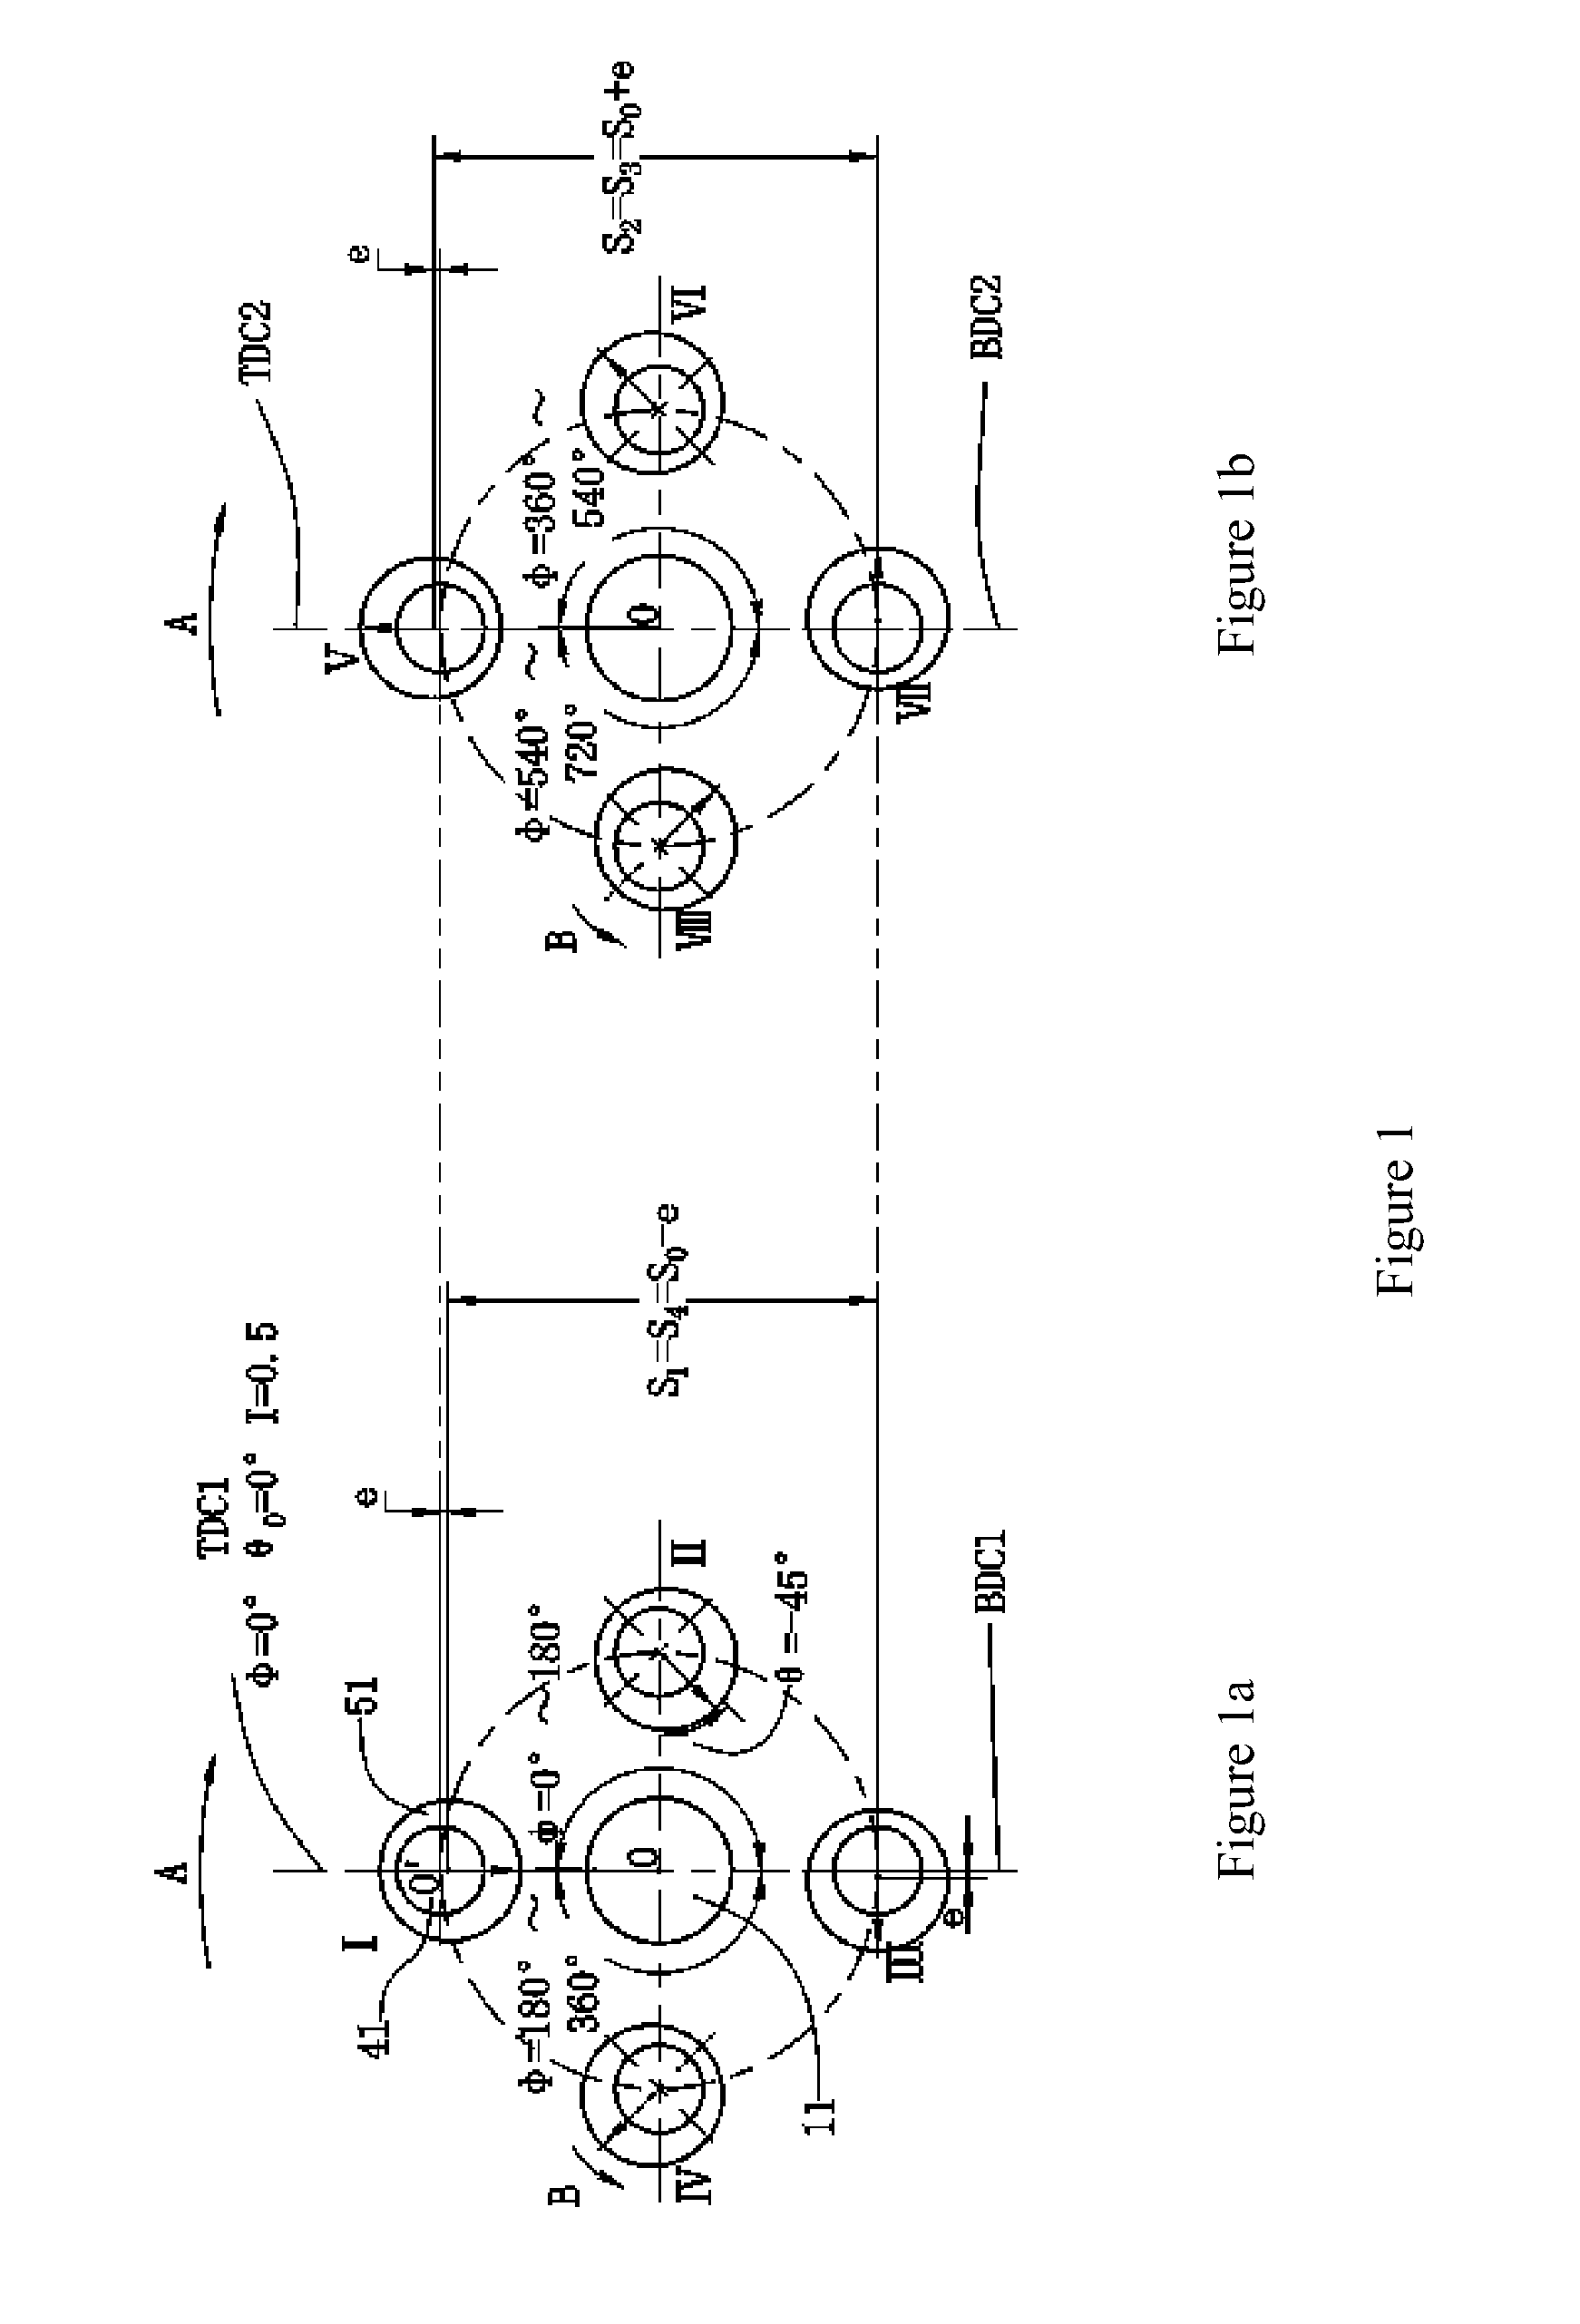 Apparatus with variable compression ratio and variable expansion ratio